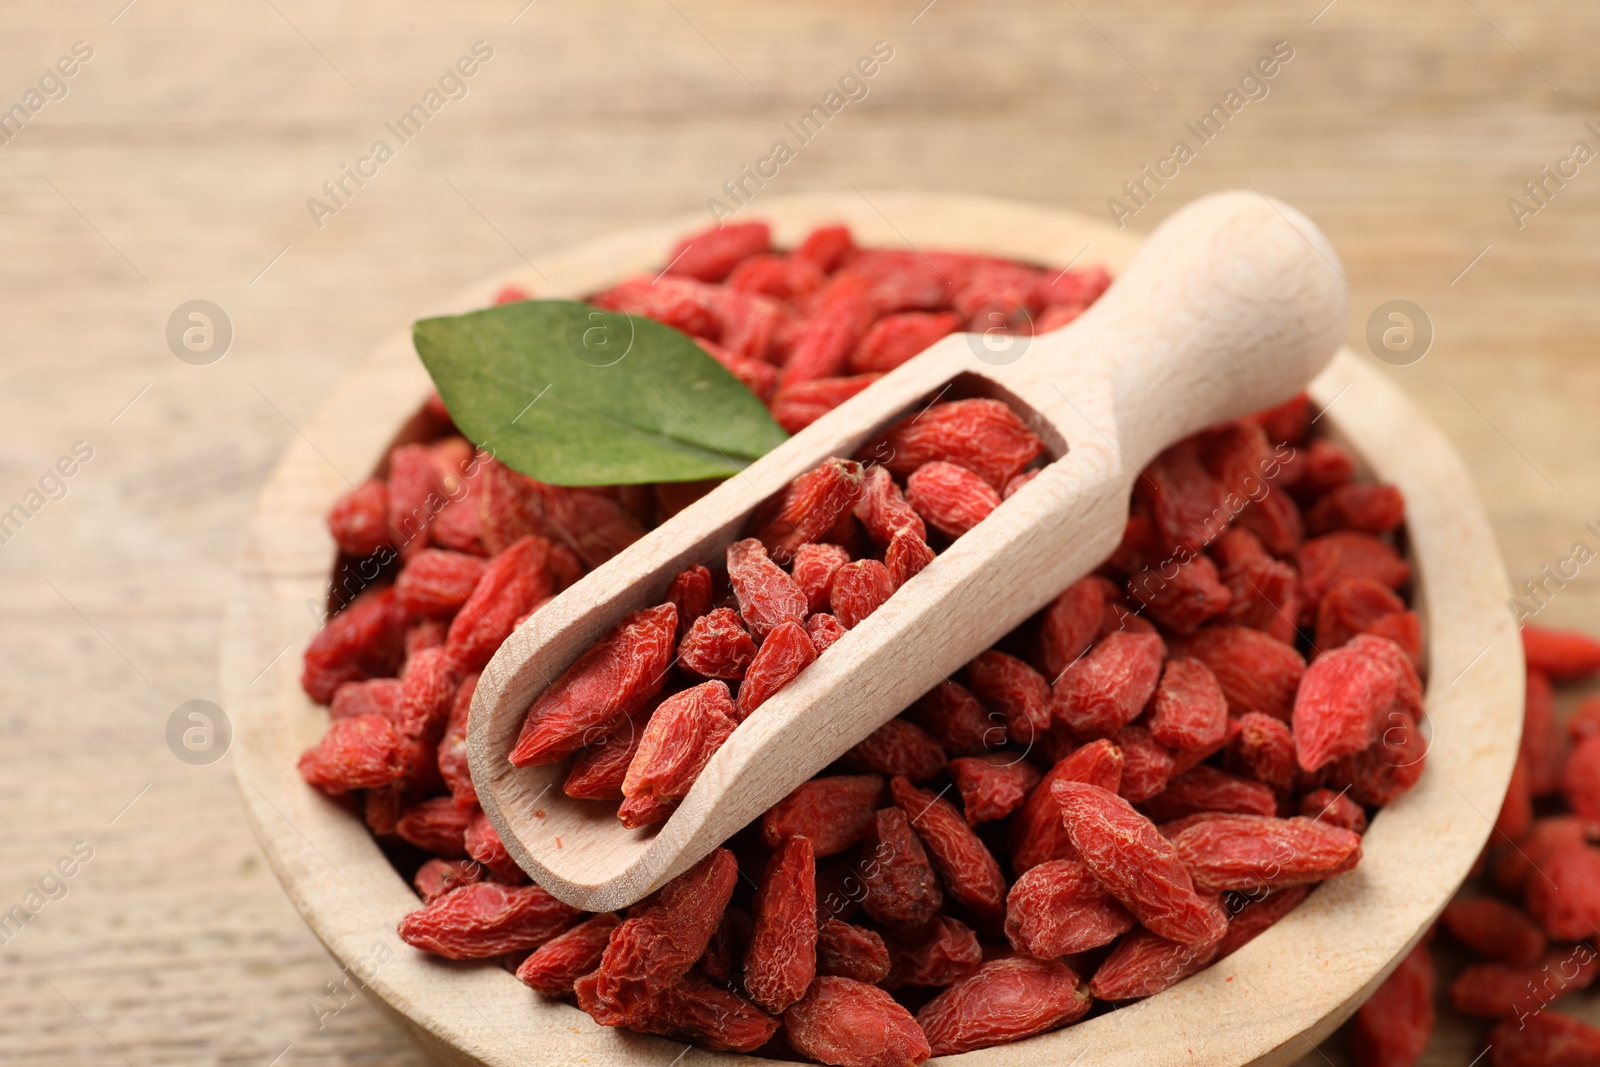 Photo of Dried goji berries in bowl and scoop on wooden table, closeup